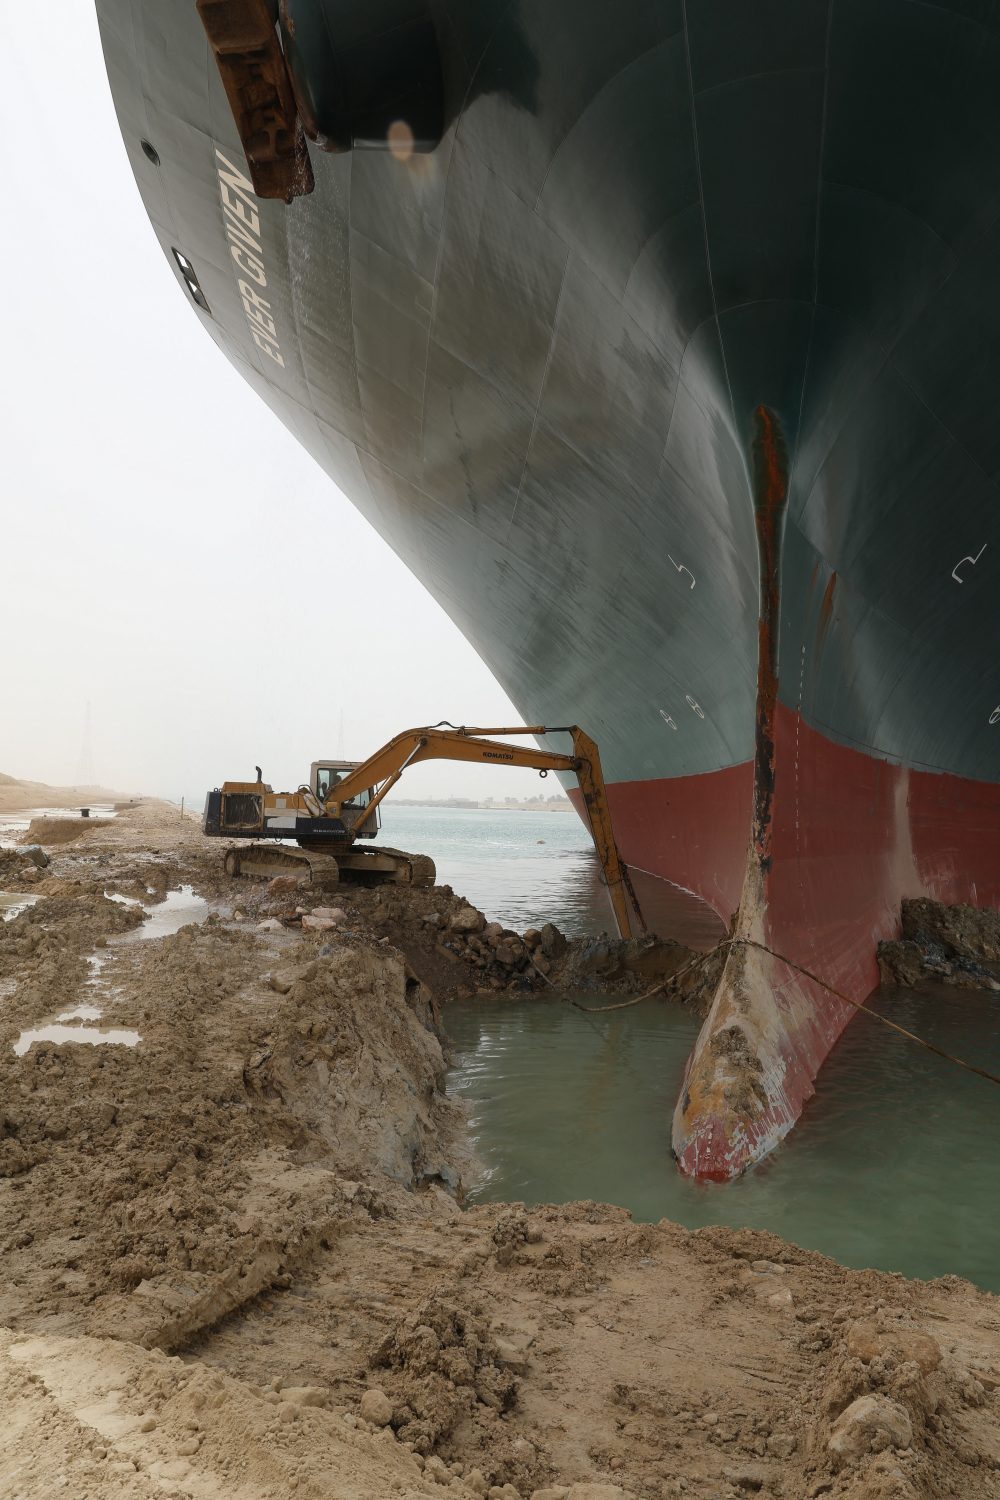 The photo shows a small bulldozer moving earth as it tries to free a huge container ship grounded in the Suez Canal.